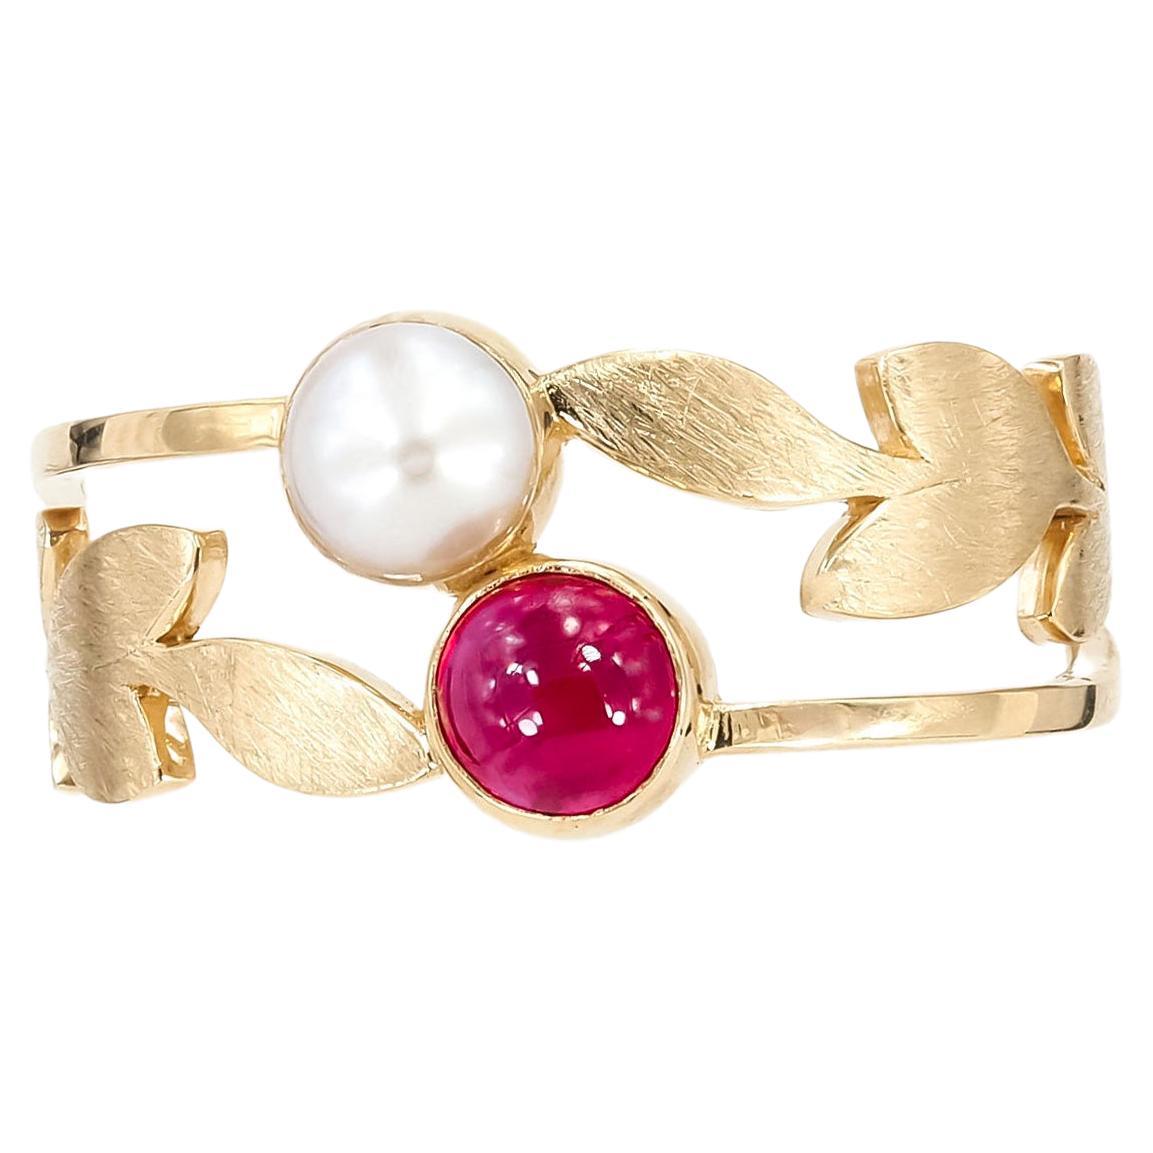 14k gold ring with ruby and pearl

total weight 2.35 gr

Gemstones (all are tested by proffesional gemmologist)

Ruby
round  cabochon cut, 0.5 ct, transparent, red color. 

Freshwater cultivated pearls - 5 mm., white color, button form